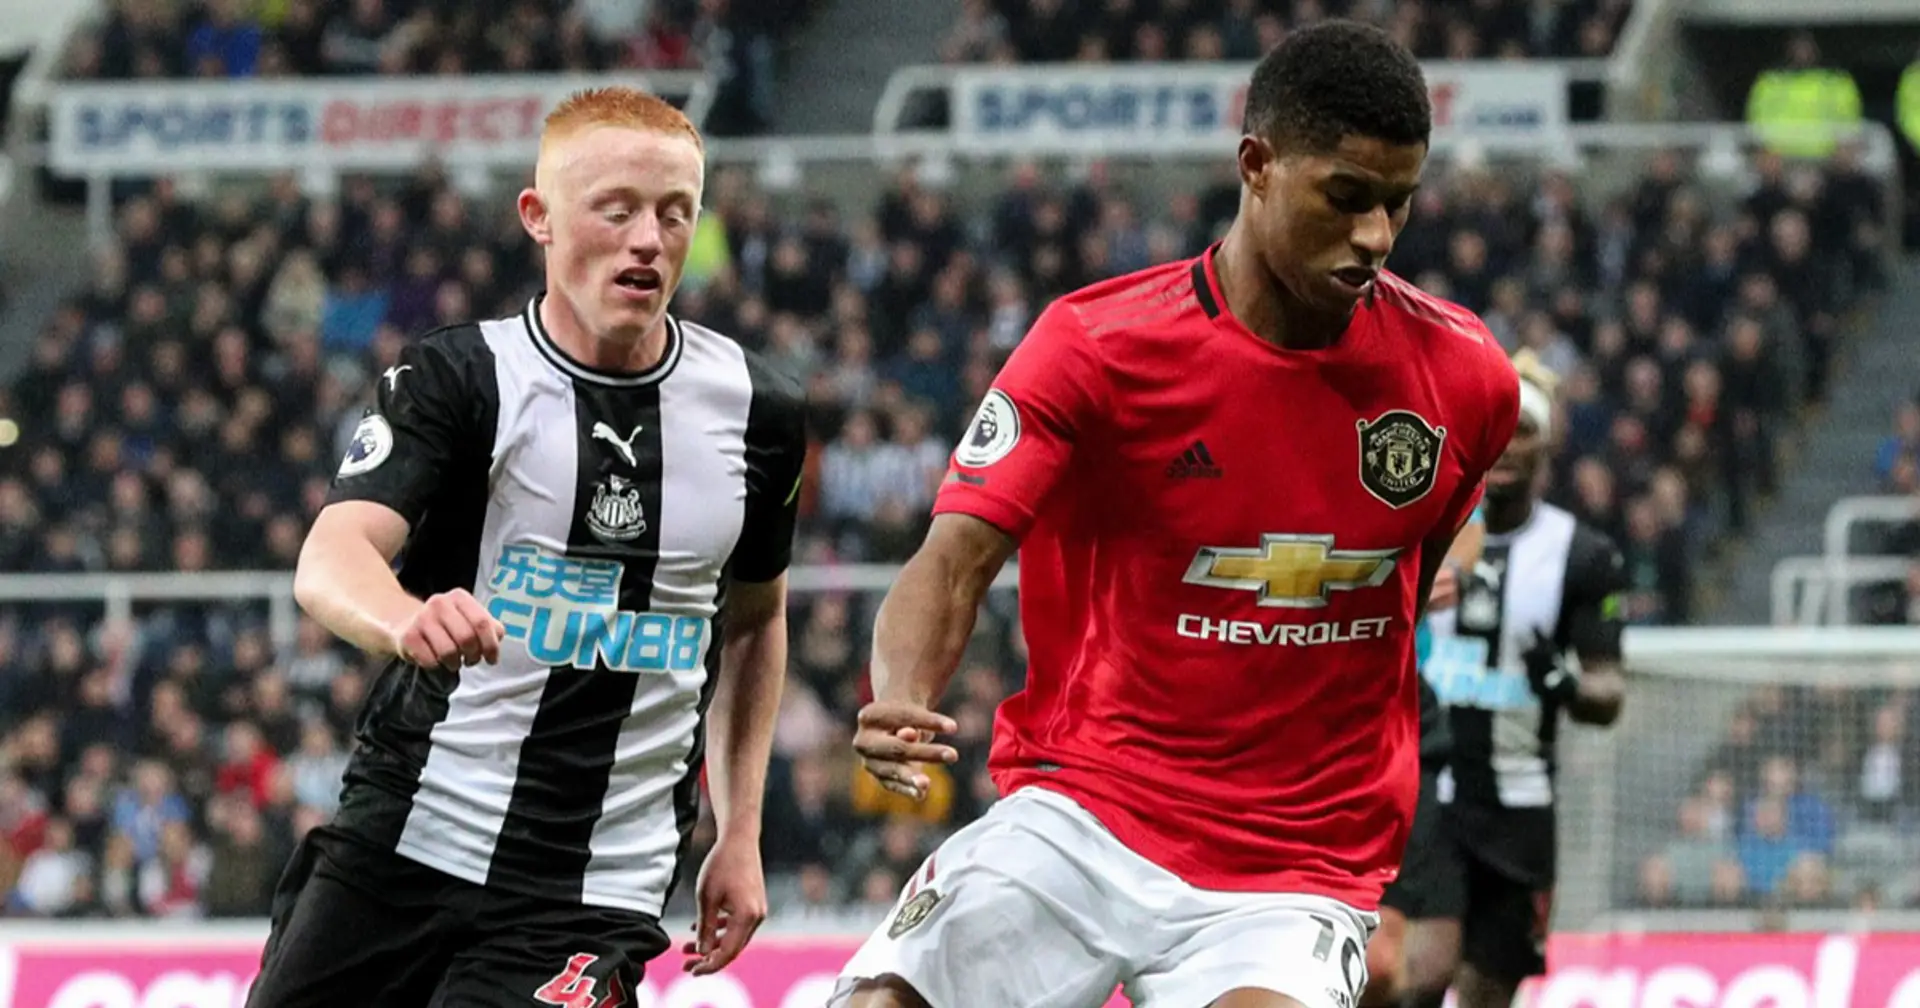 Newcastle United vs Man United: team news, probable line-ups, score predictions and more – preview